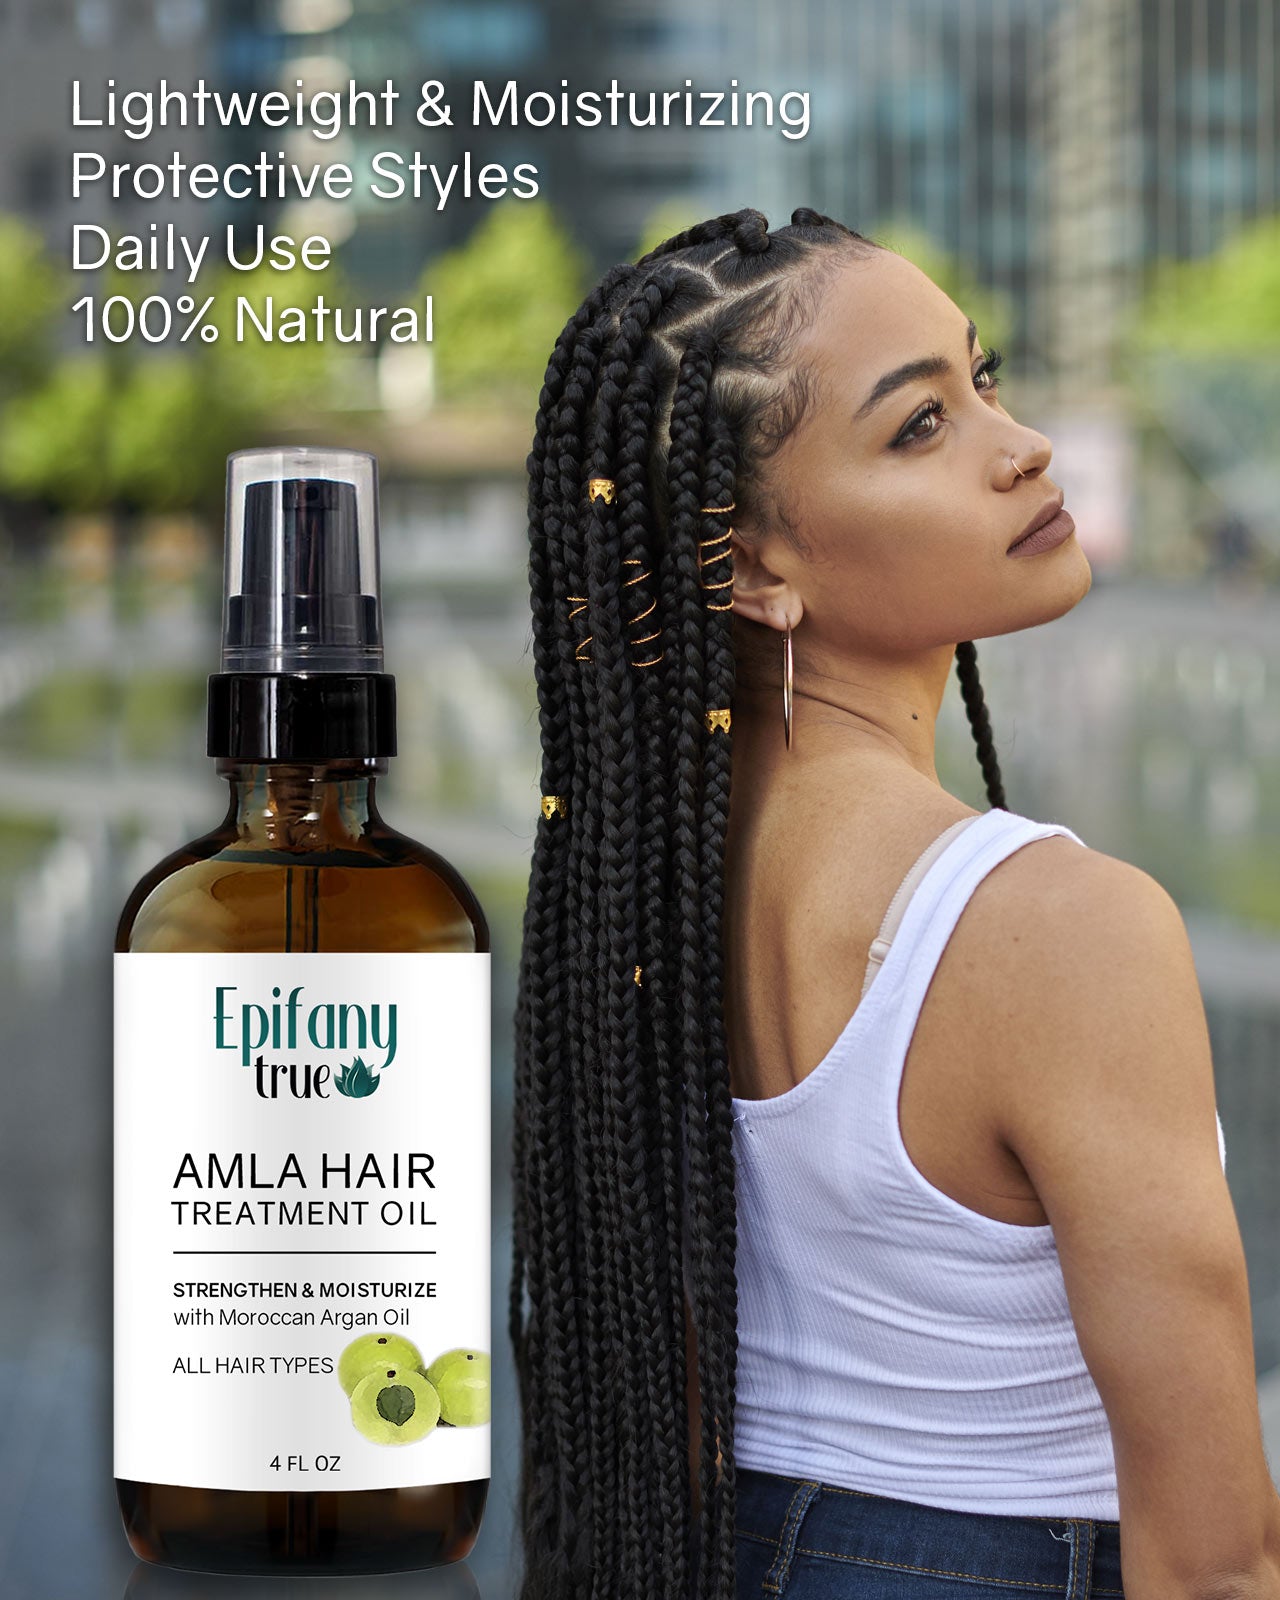 Epifany True Amla Hair Treatment Oil 4oz 100% natural, lightweight, moisturizing for protective styles